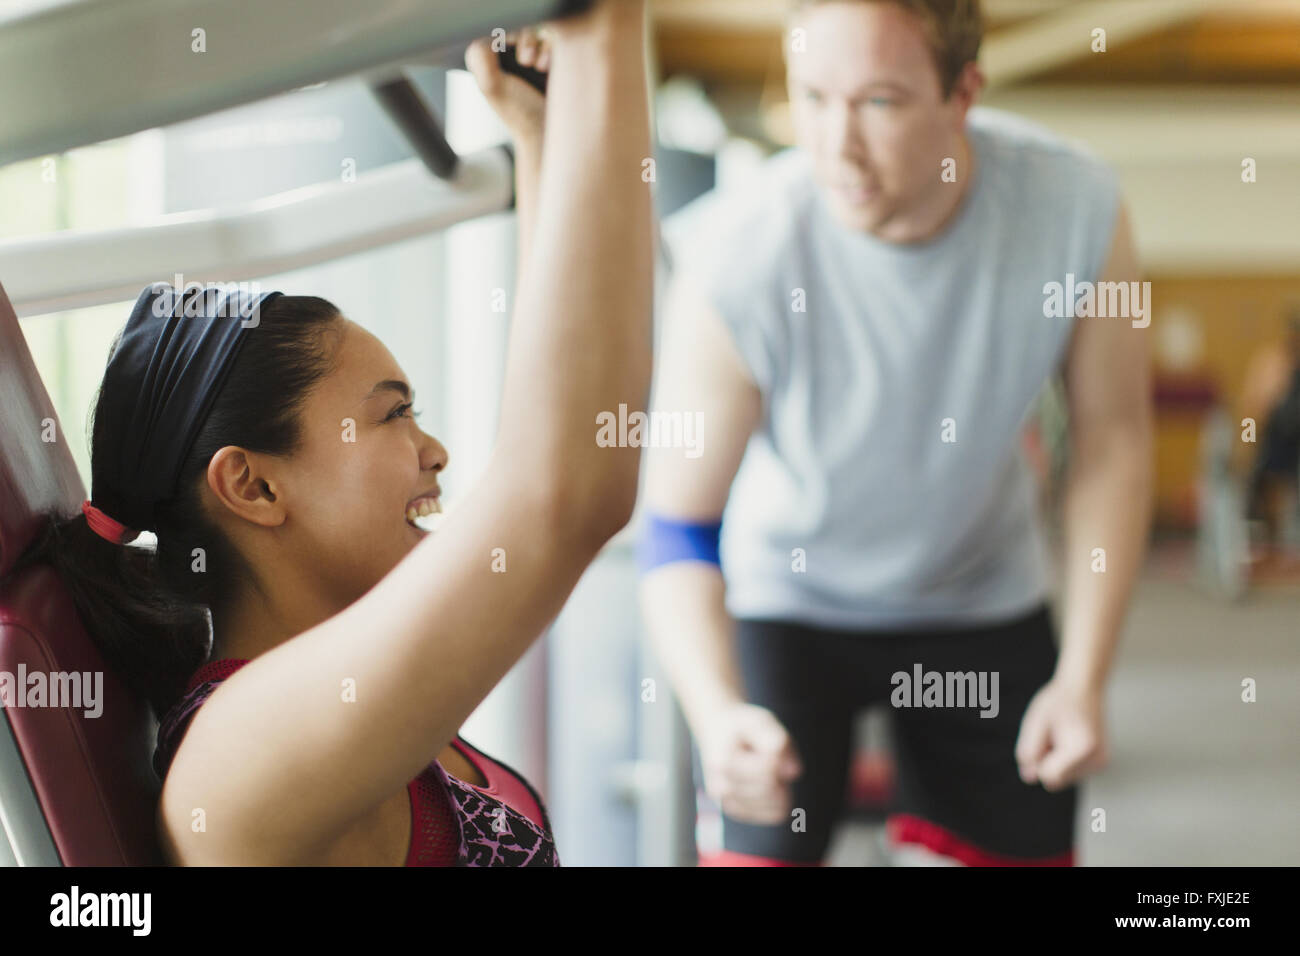 Personal trainer guiding enthusiastic woman using exercise equipment at gym Stock Photo